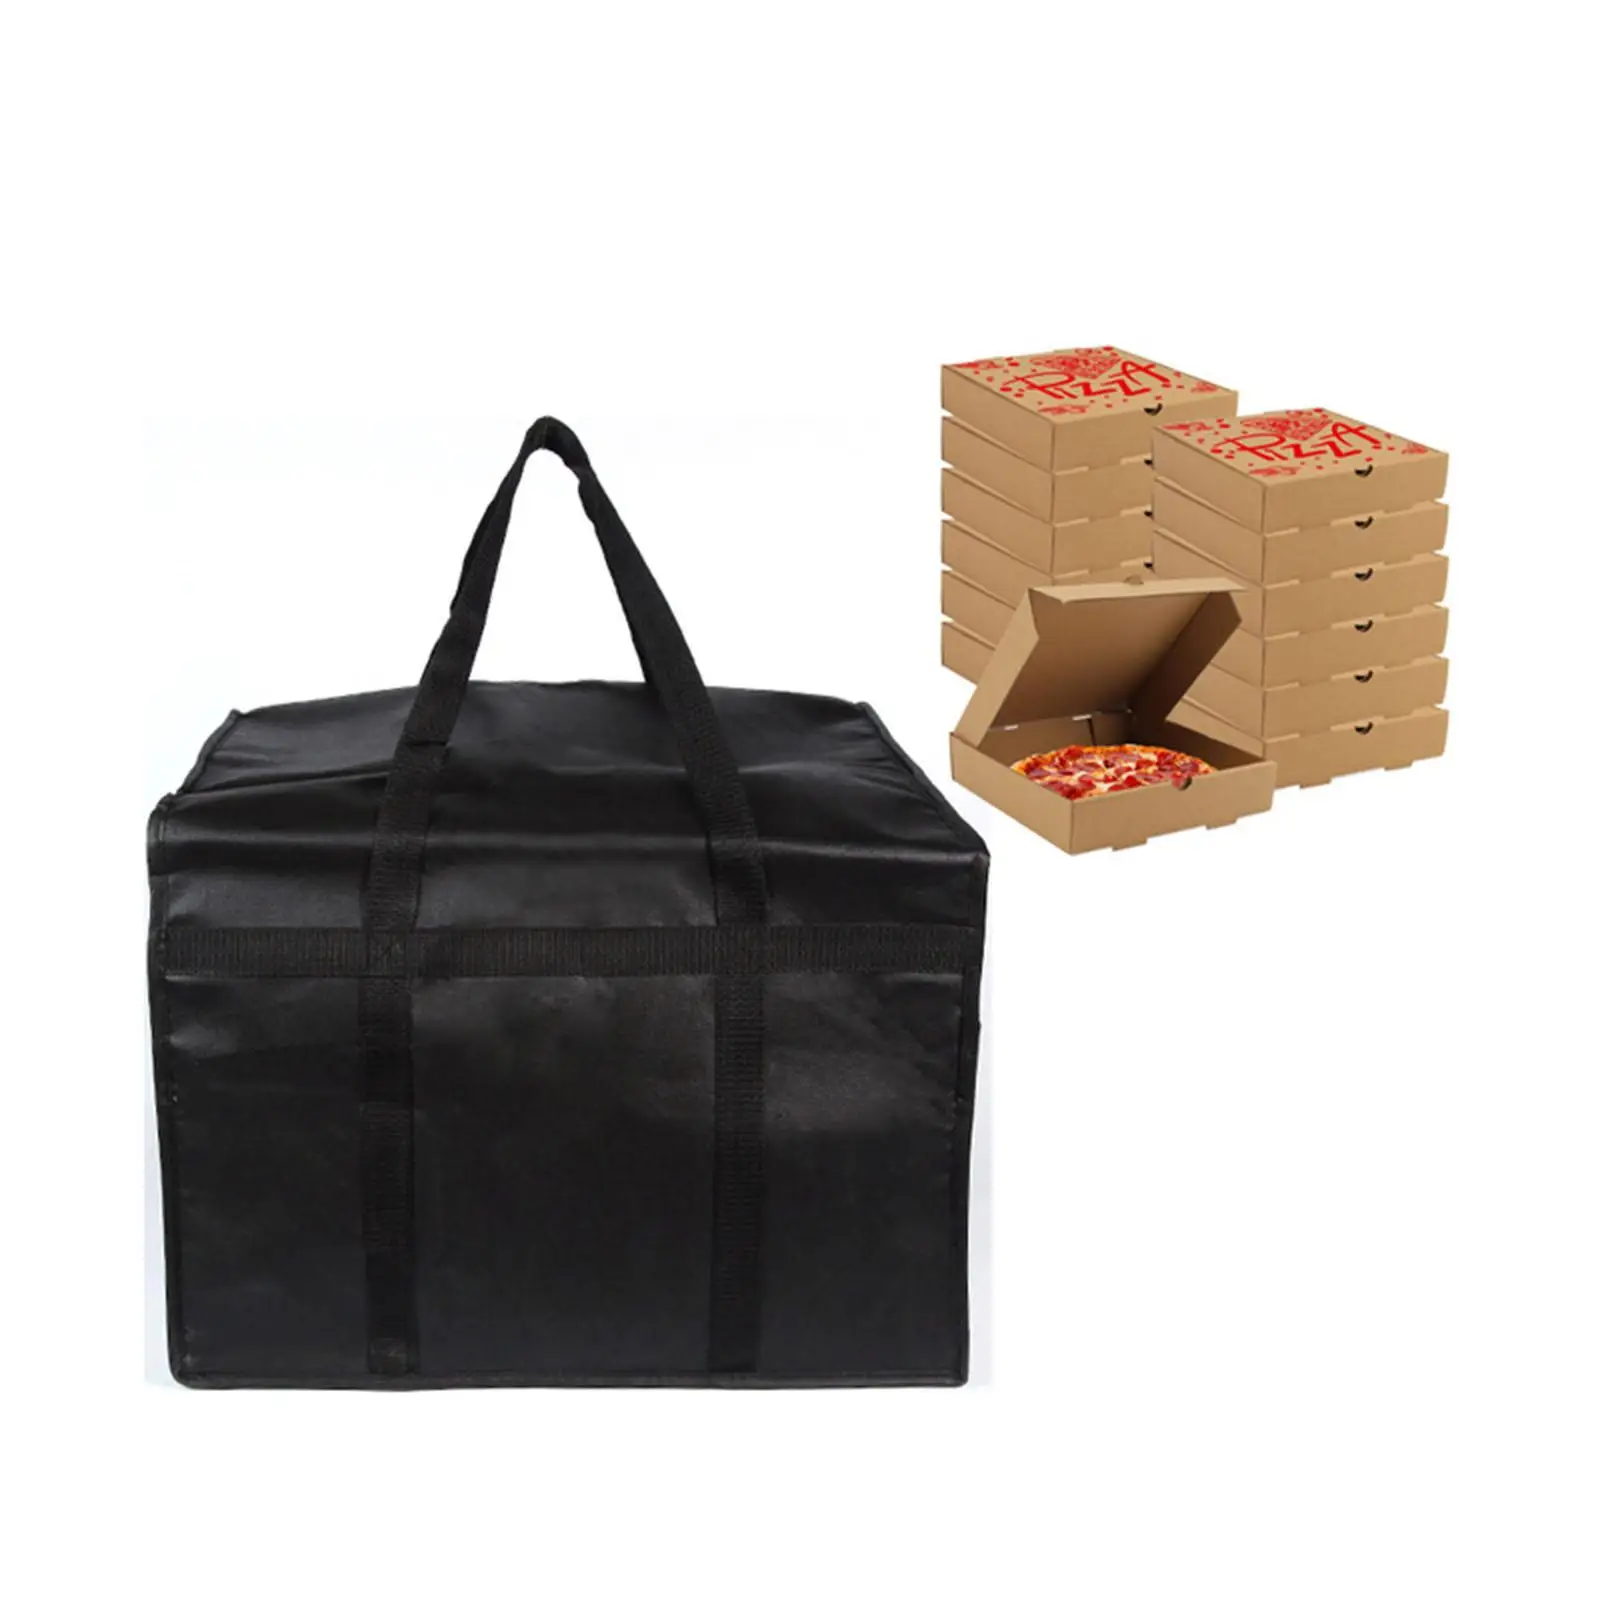 Food Pizza Develivey Bag Reusable Hot Cold Food Storage Carrying Case Heavy Duty for Personal Shopping Commercial Home Outdoor